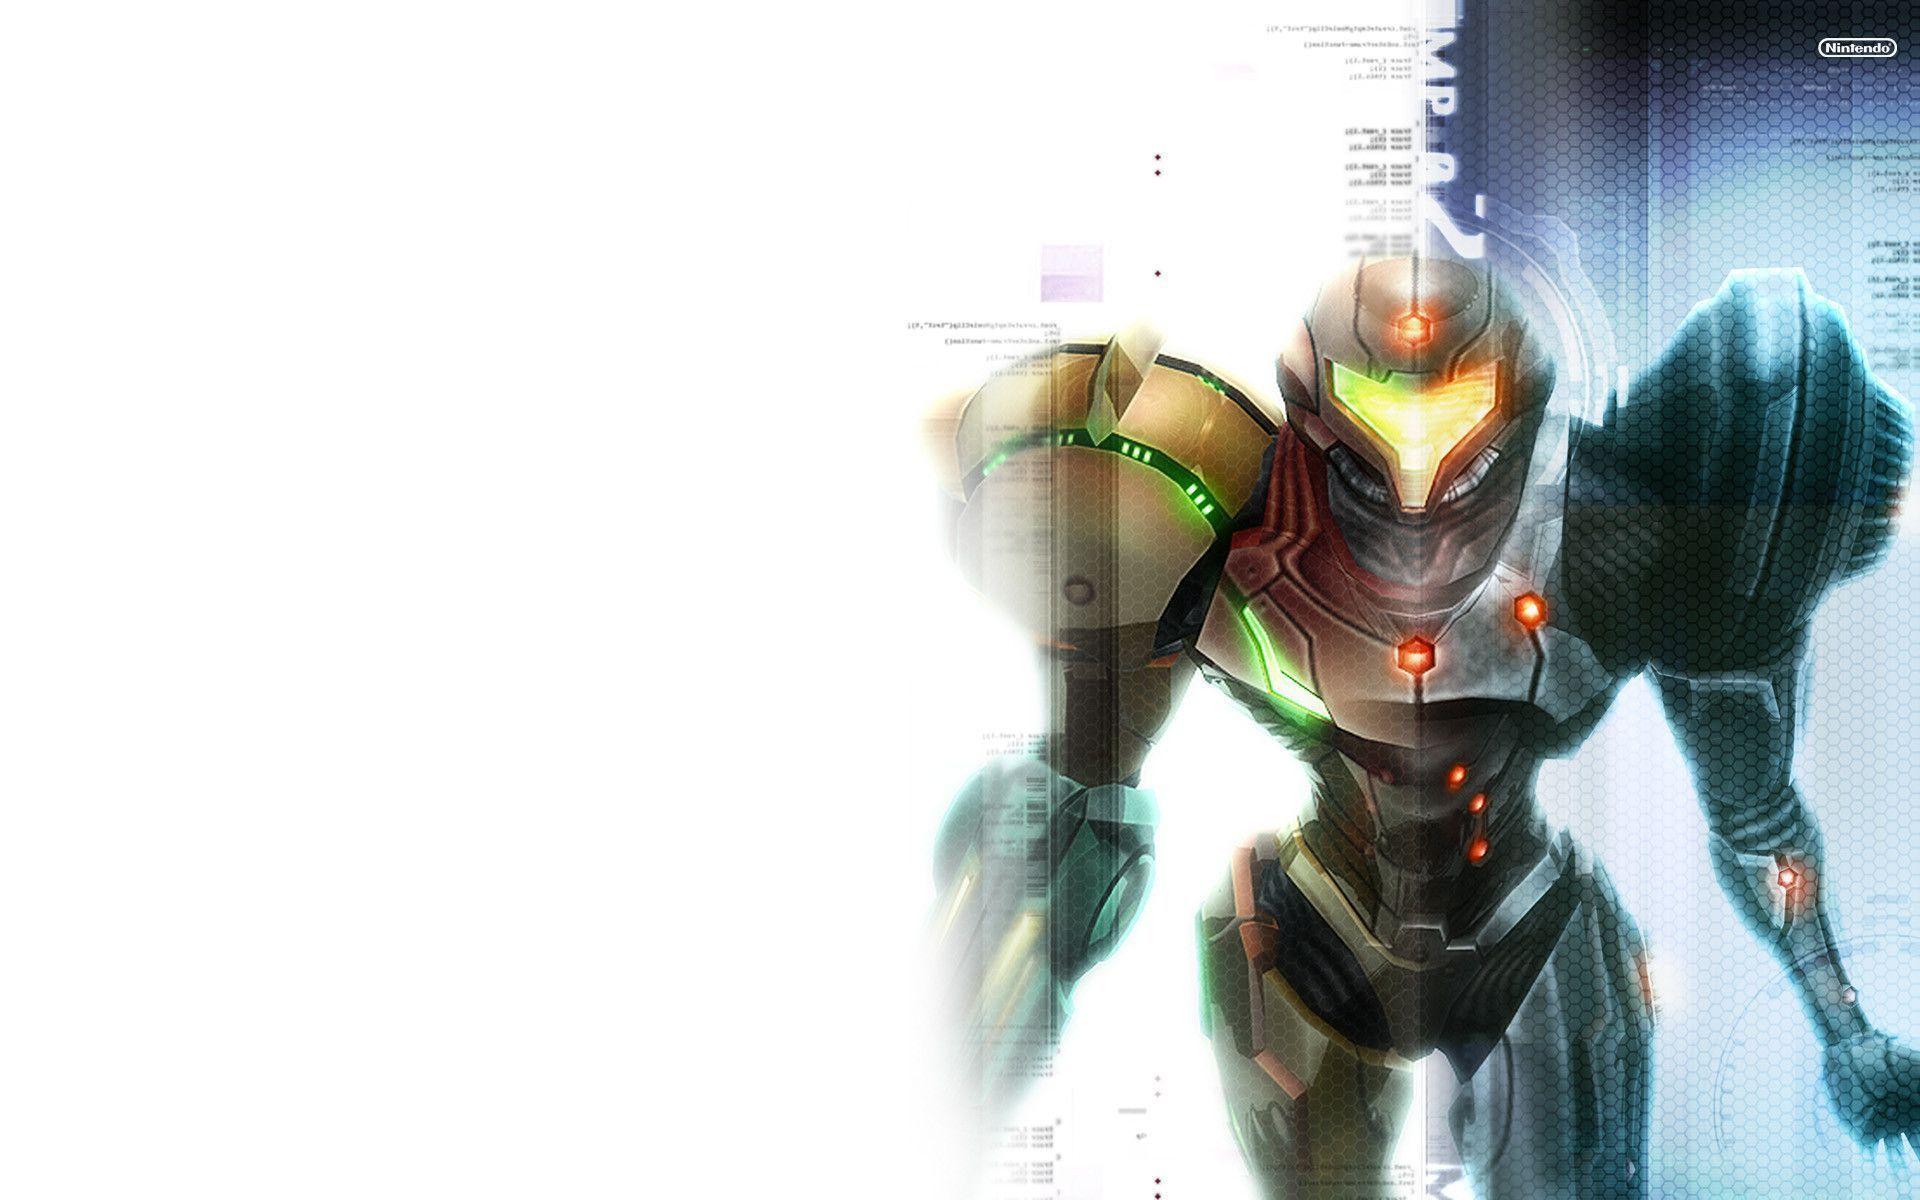 Can Anyone Find The Source Creator For This Amazing Samus